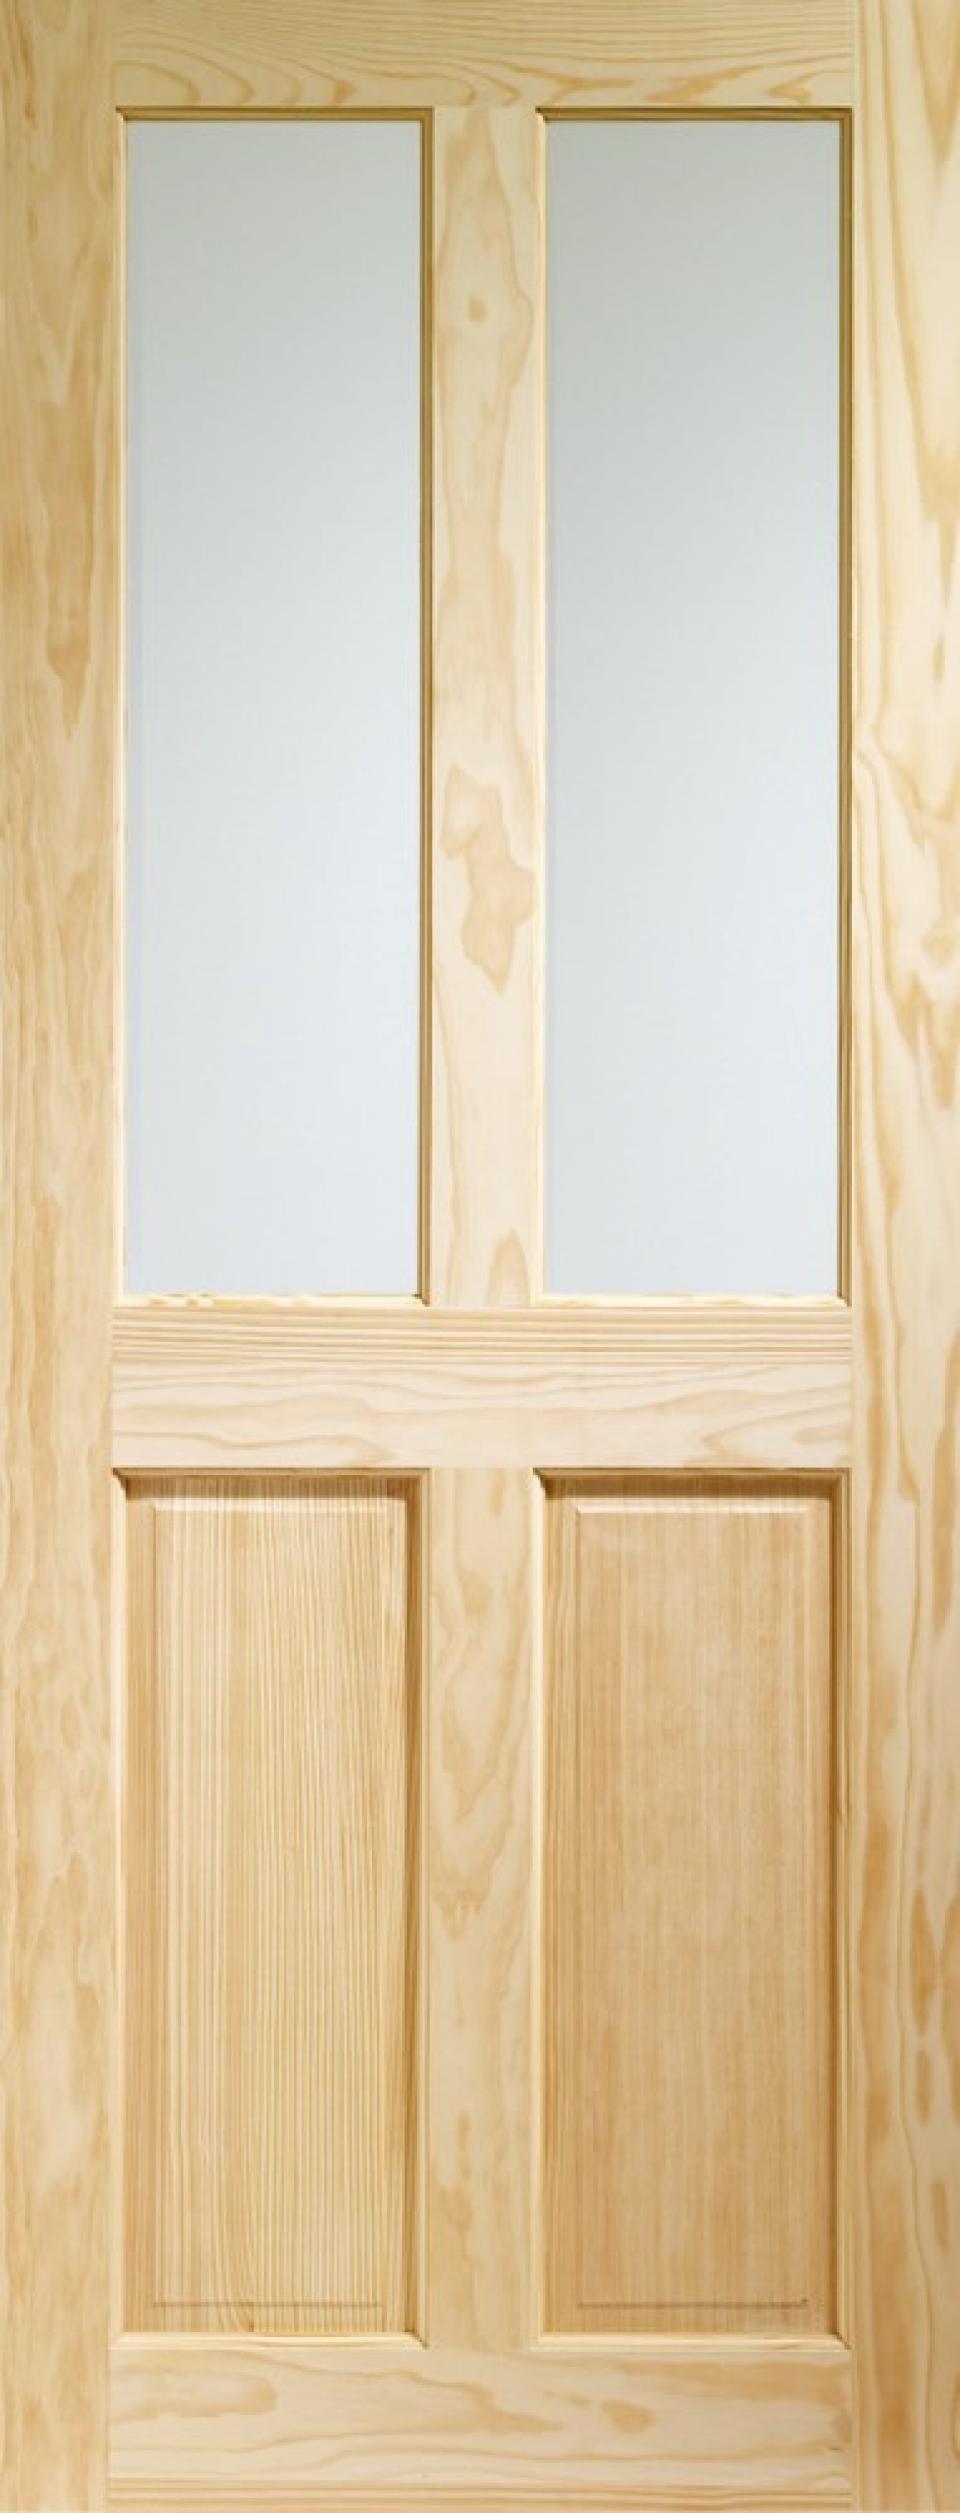 Clear Pine Vict Clear Glass 1981 x 838 x 35mm (33)